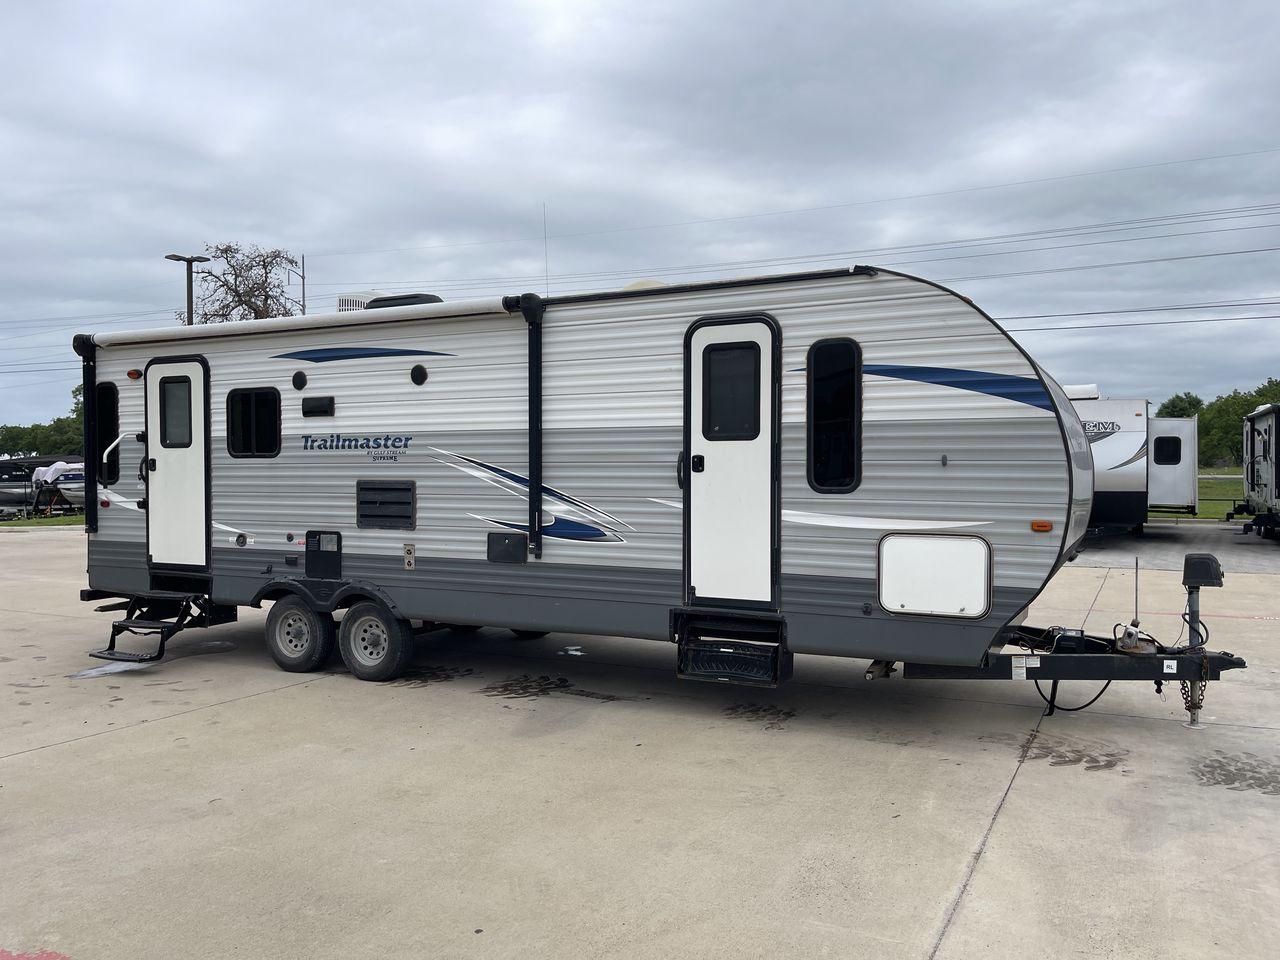 2018 GULFSTREAM TRAILMASTER 262RLS (1NL1GTP2XJ1) , Length: 31.25 ft. | Dry Weight: 6,849 lbs. | Slides: 1 transmission, located at 4319 N Main St, Cleburne, TX, 76033, (817) 678-5133, 32.385960, -97.391212 - This 2018 Gulf Stream Trailmaster 262RLS travel trailer measures just over 31' in length. It is a dual axle, steel wheel setup with a dry weight of 6,849 lbs and a carrying capacity of 1,421 lbs. With a dry weight of 6,849 lbs., the Trailmaster 262RLS offers easy maneuverability without compromising - Photo #20